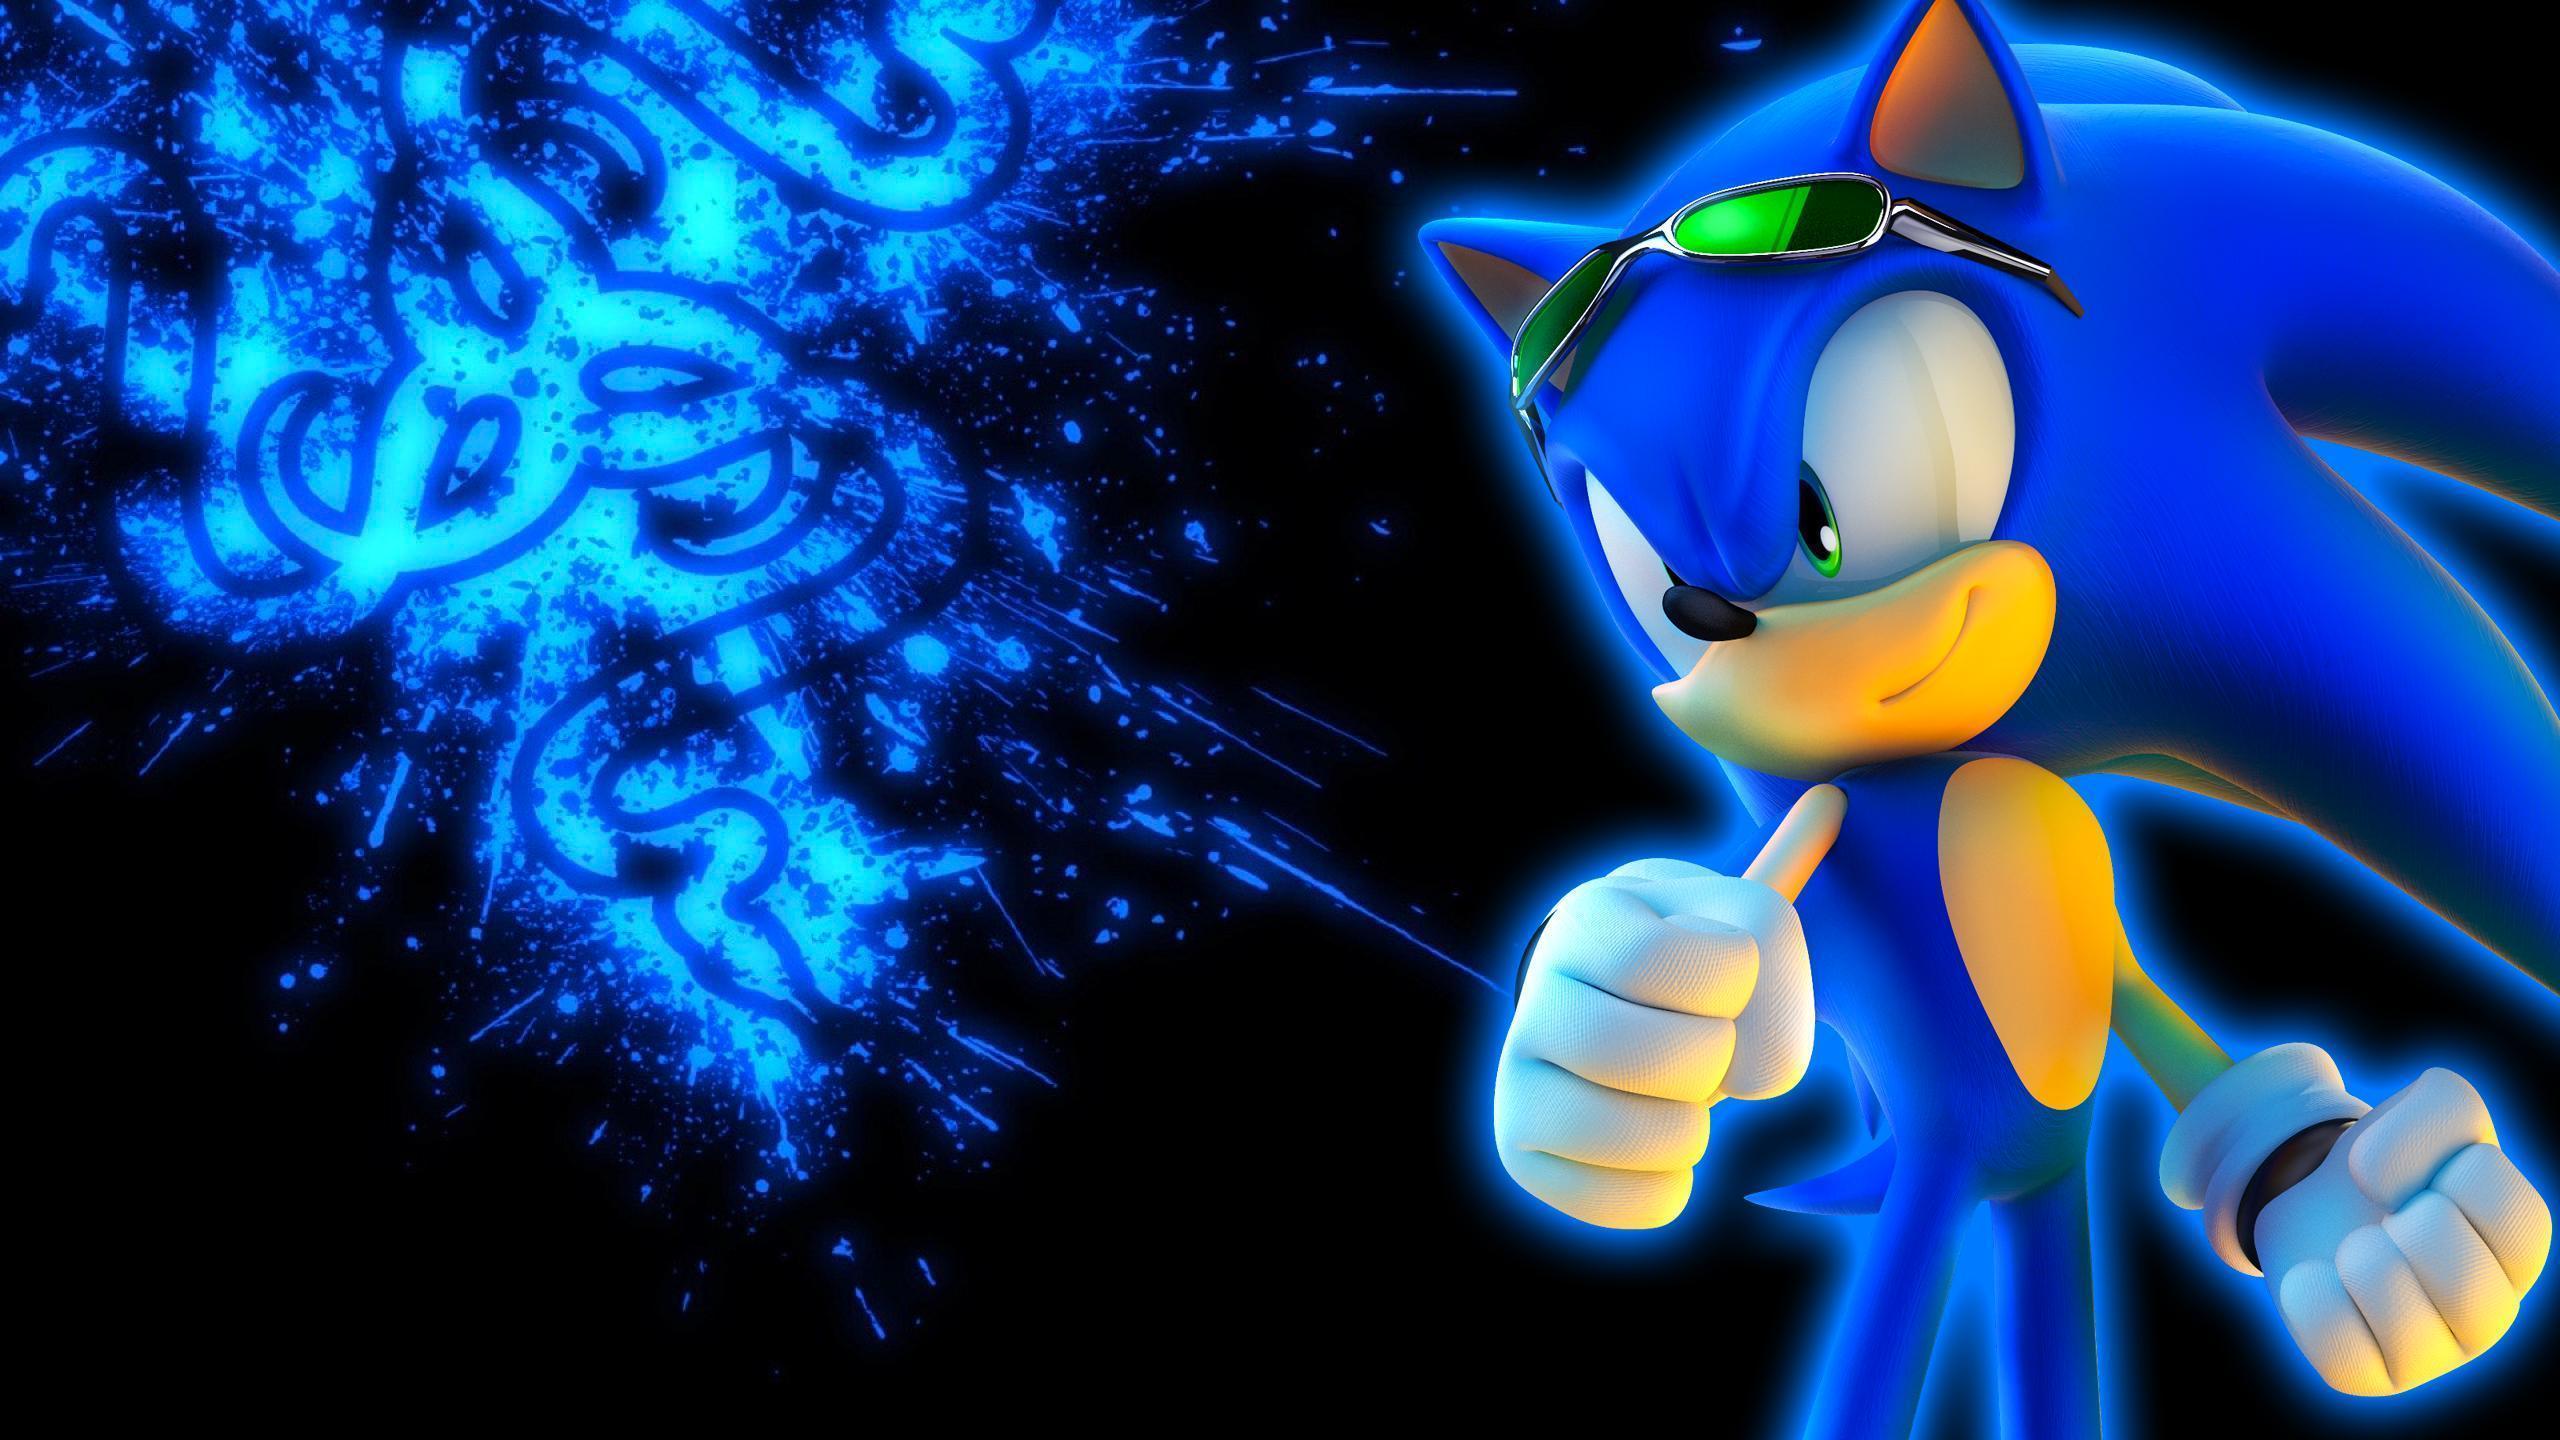 Awesome Sonic Wallpaper Free Awesome Sonic Background